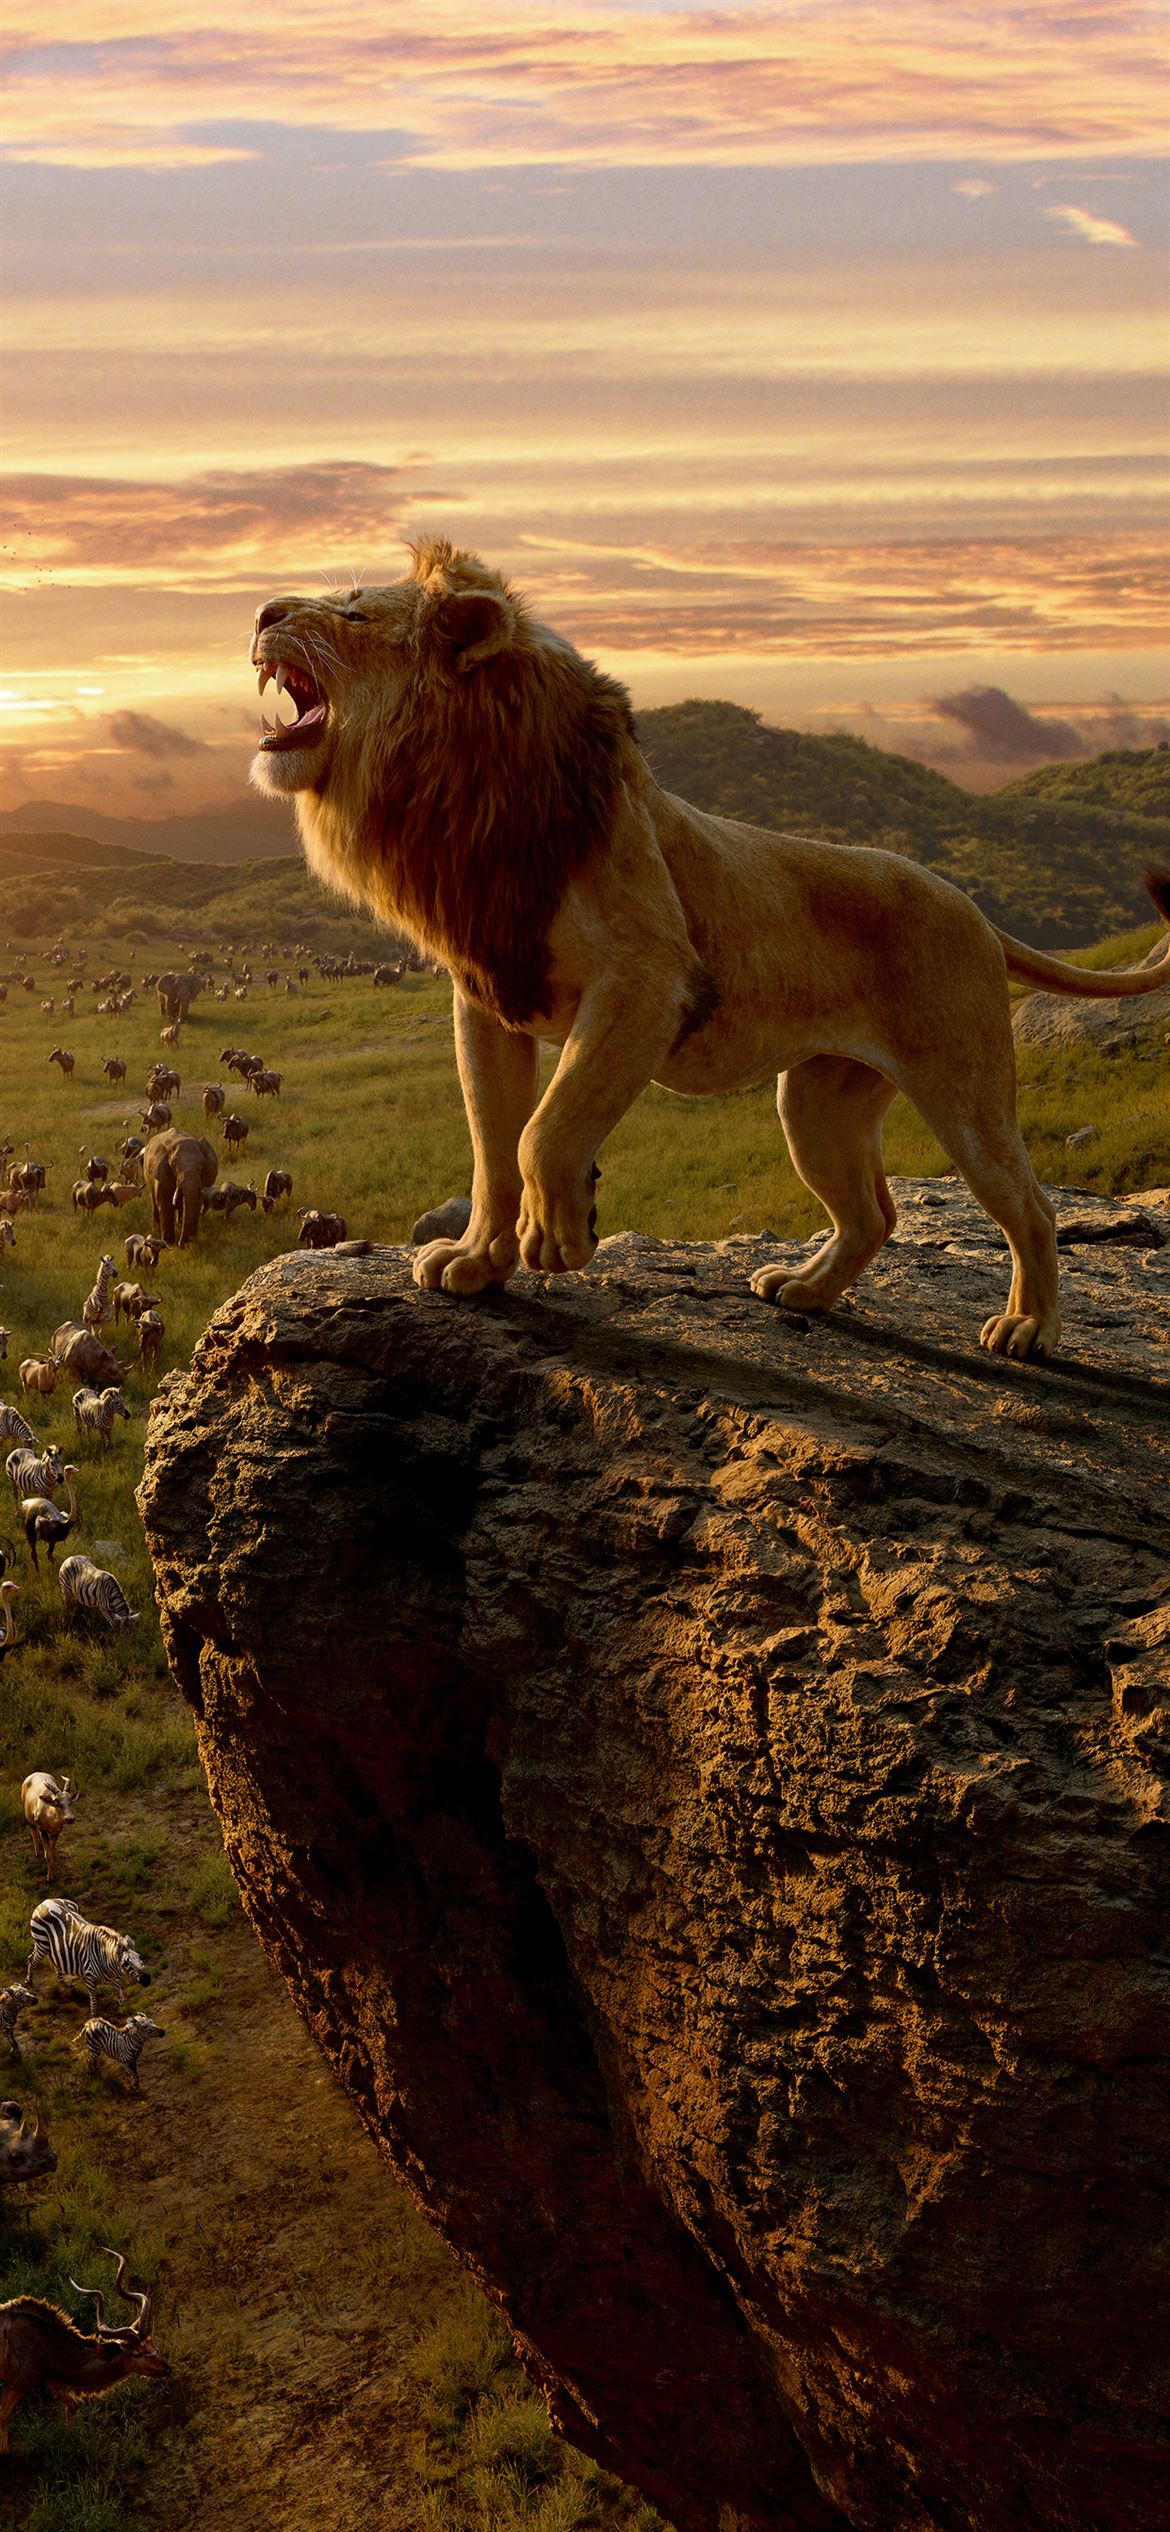 download the new for apple The Lion King